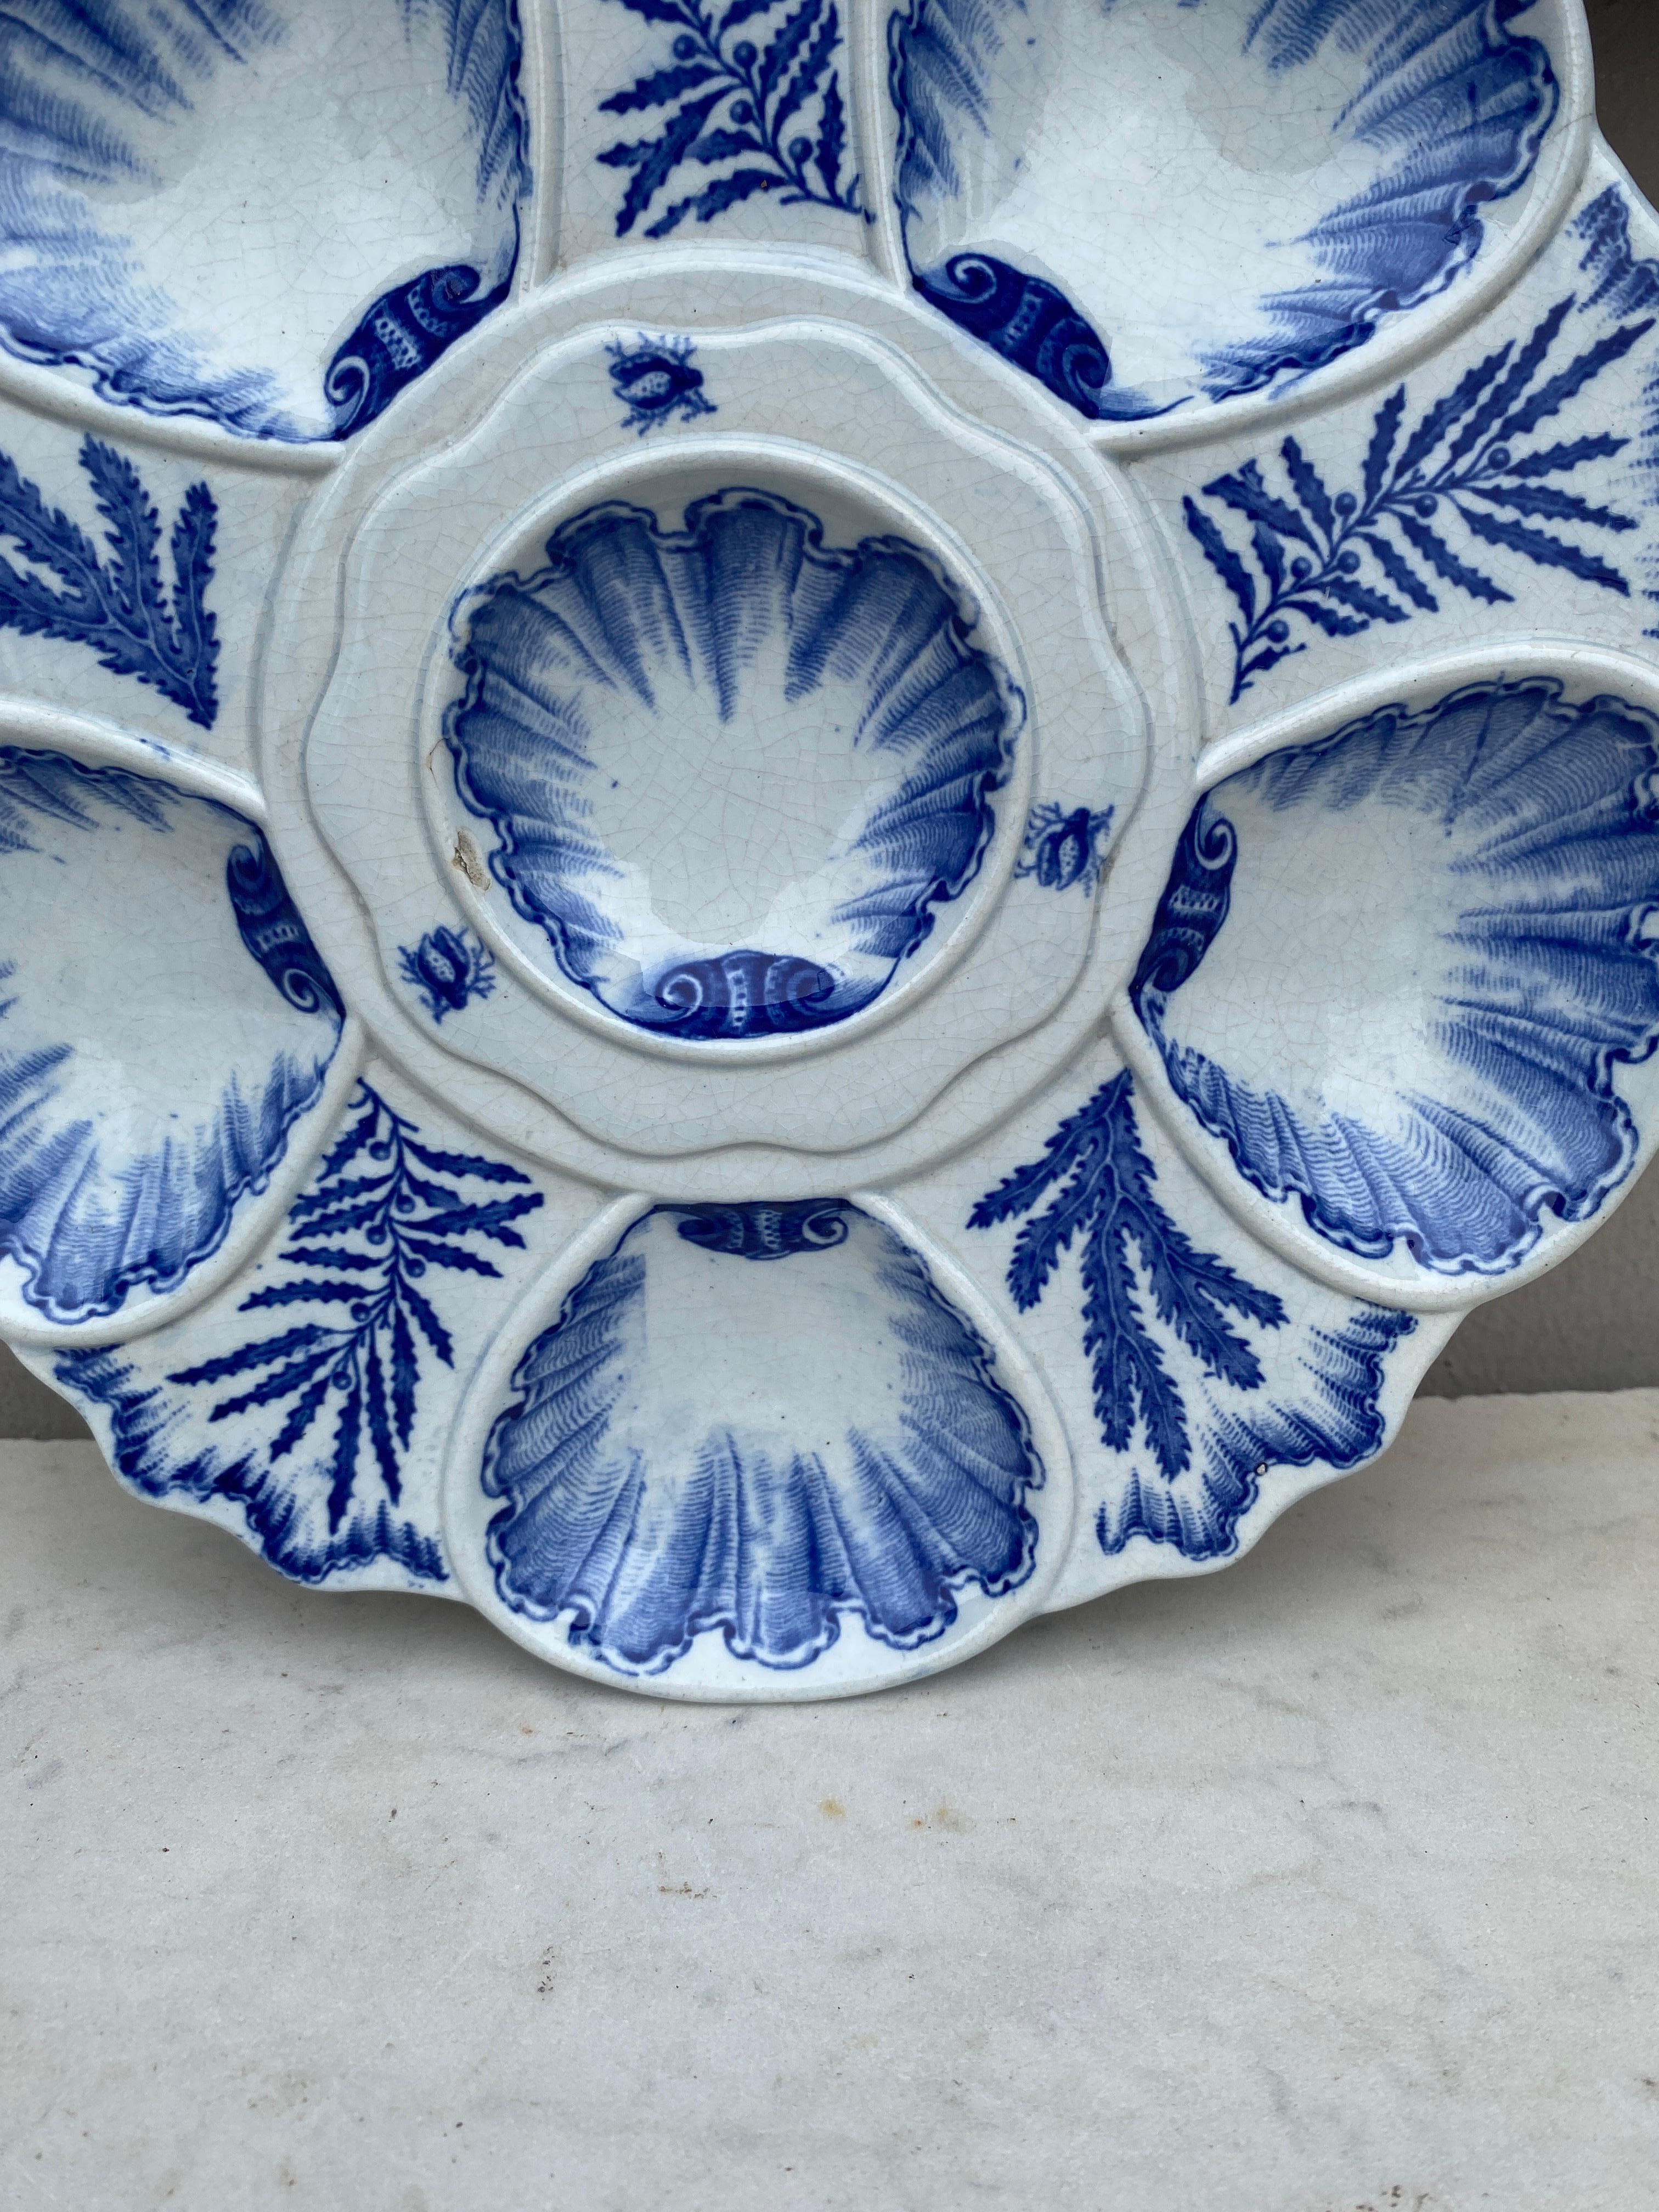 Elegant blue and white oyster plate signed Bordeaux Vieillard, circa 1890.
Six wells surrounded by blue seaweeds of different kinds.